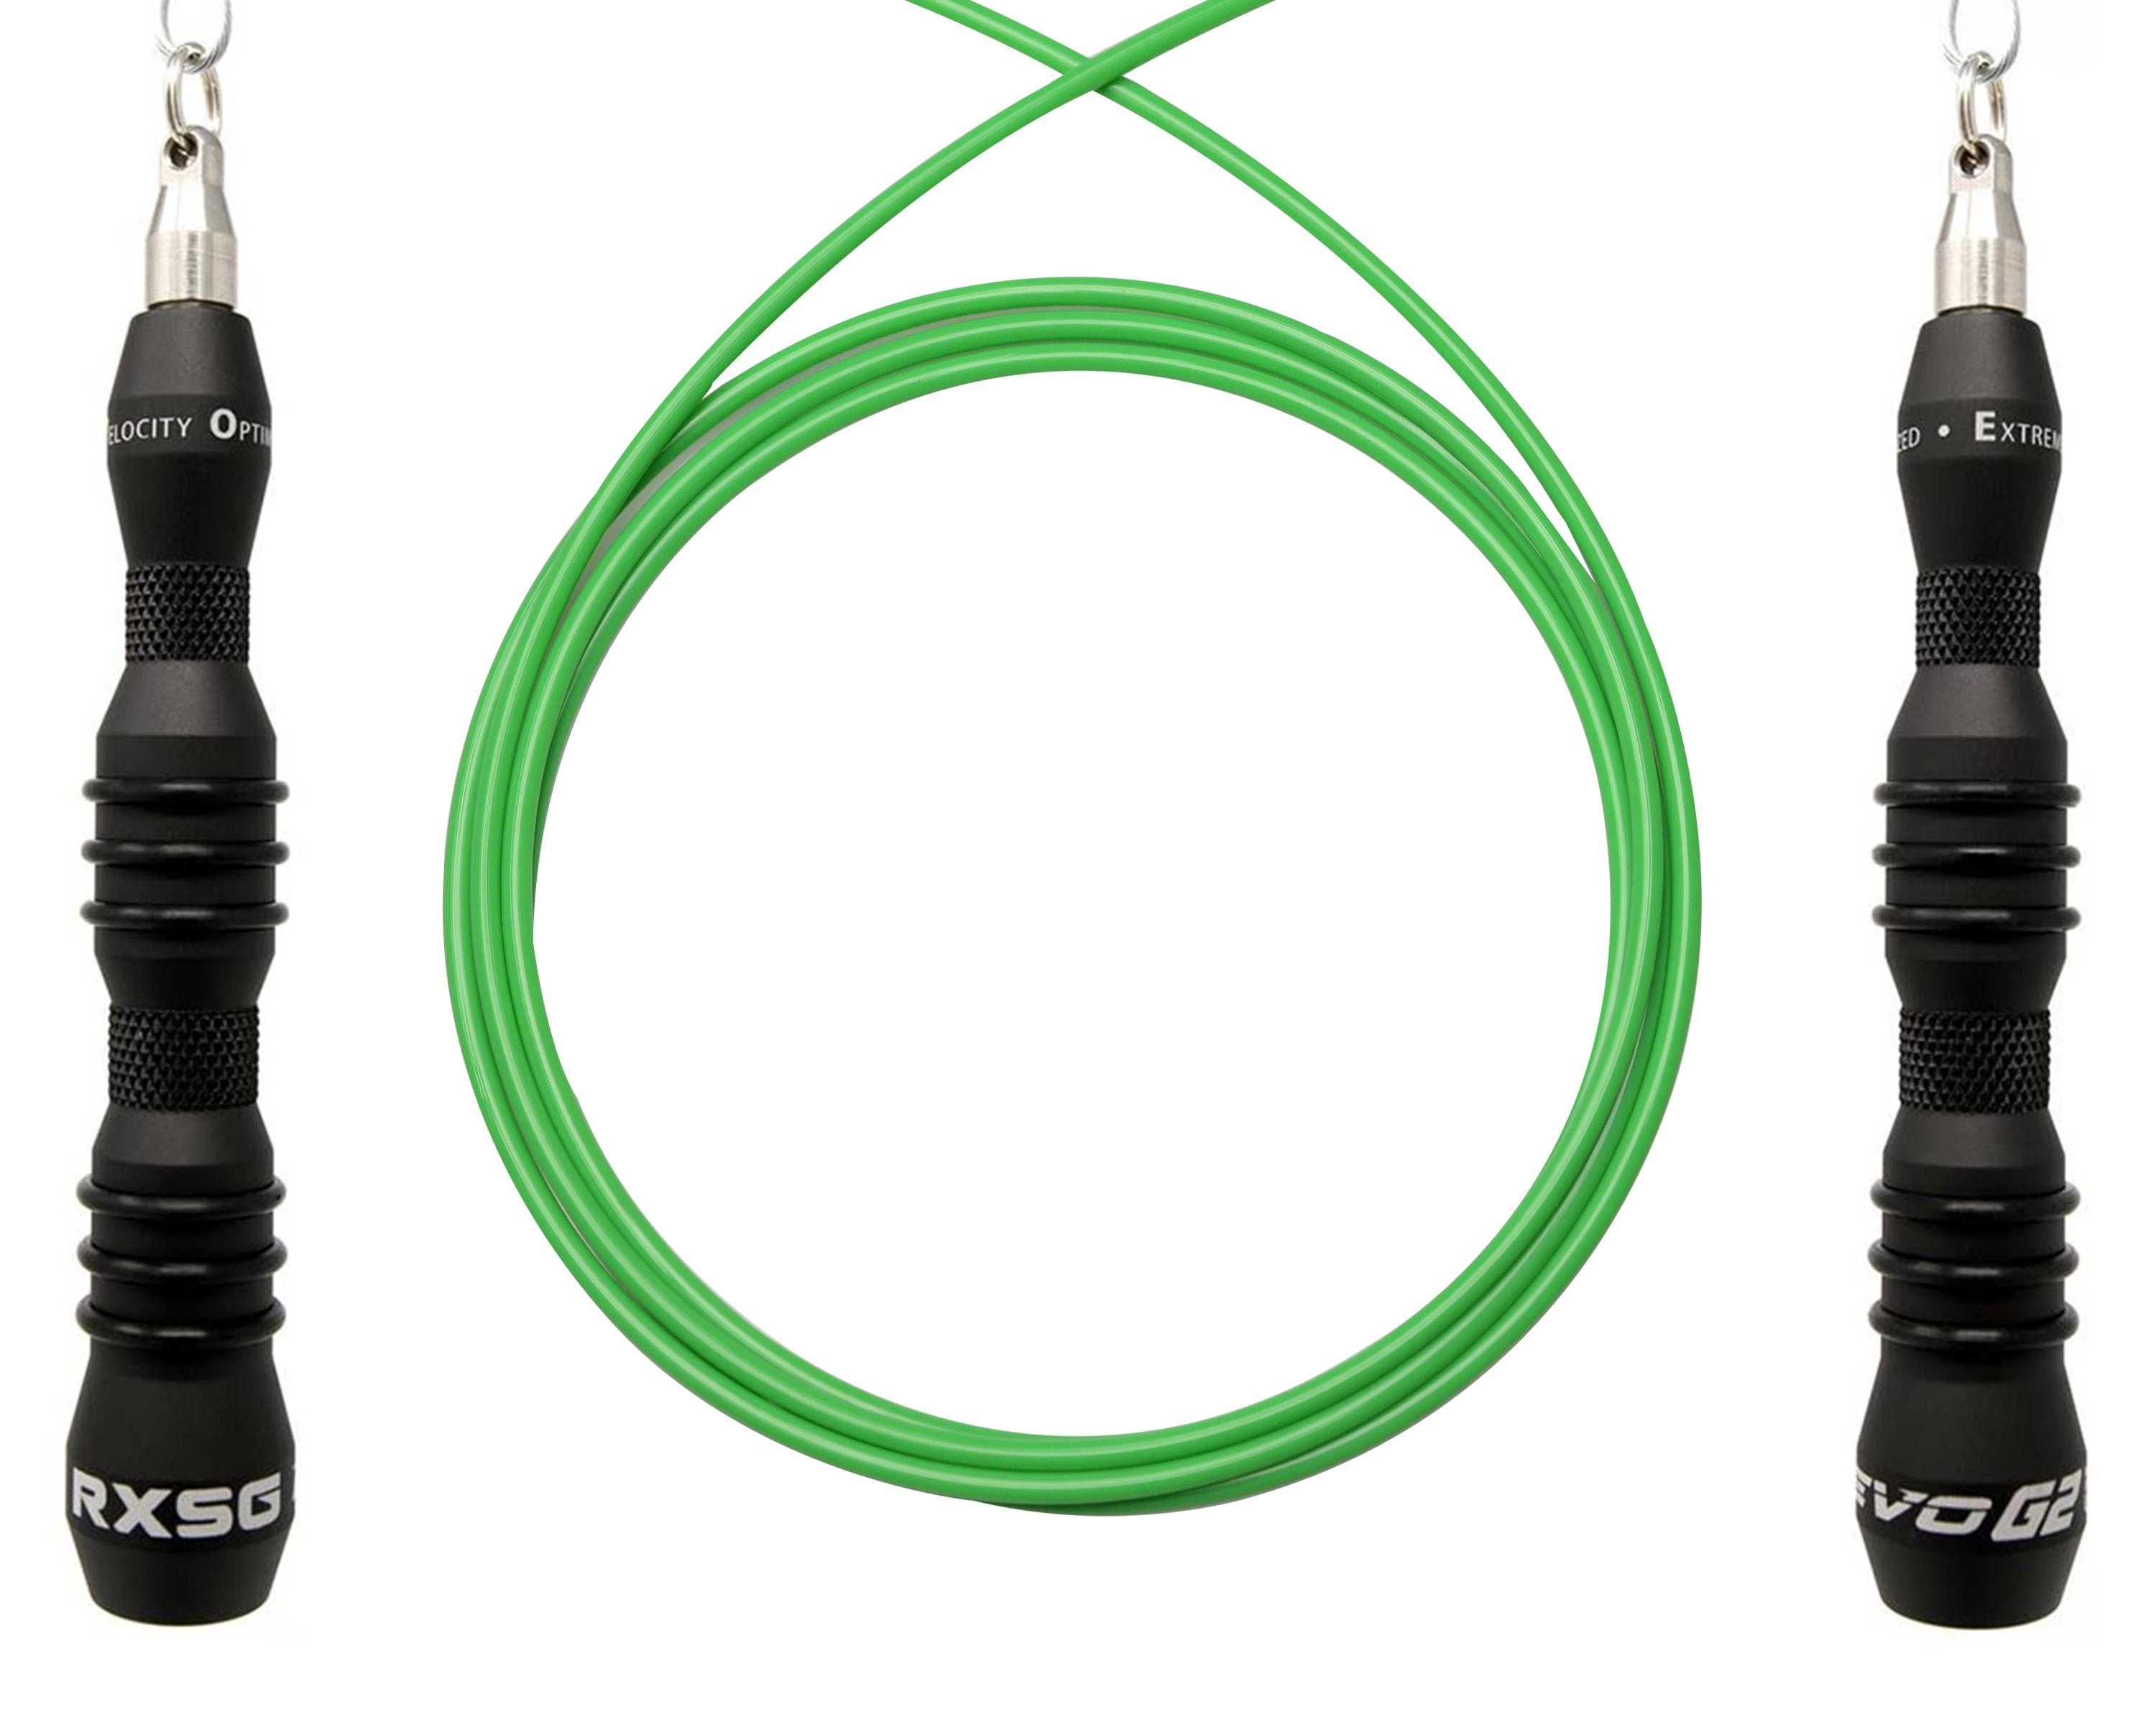 EVO G2 Speed Rope with Green Cable